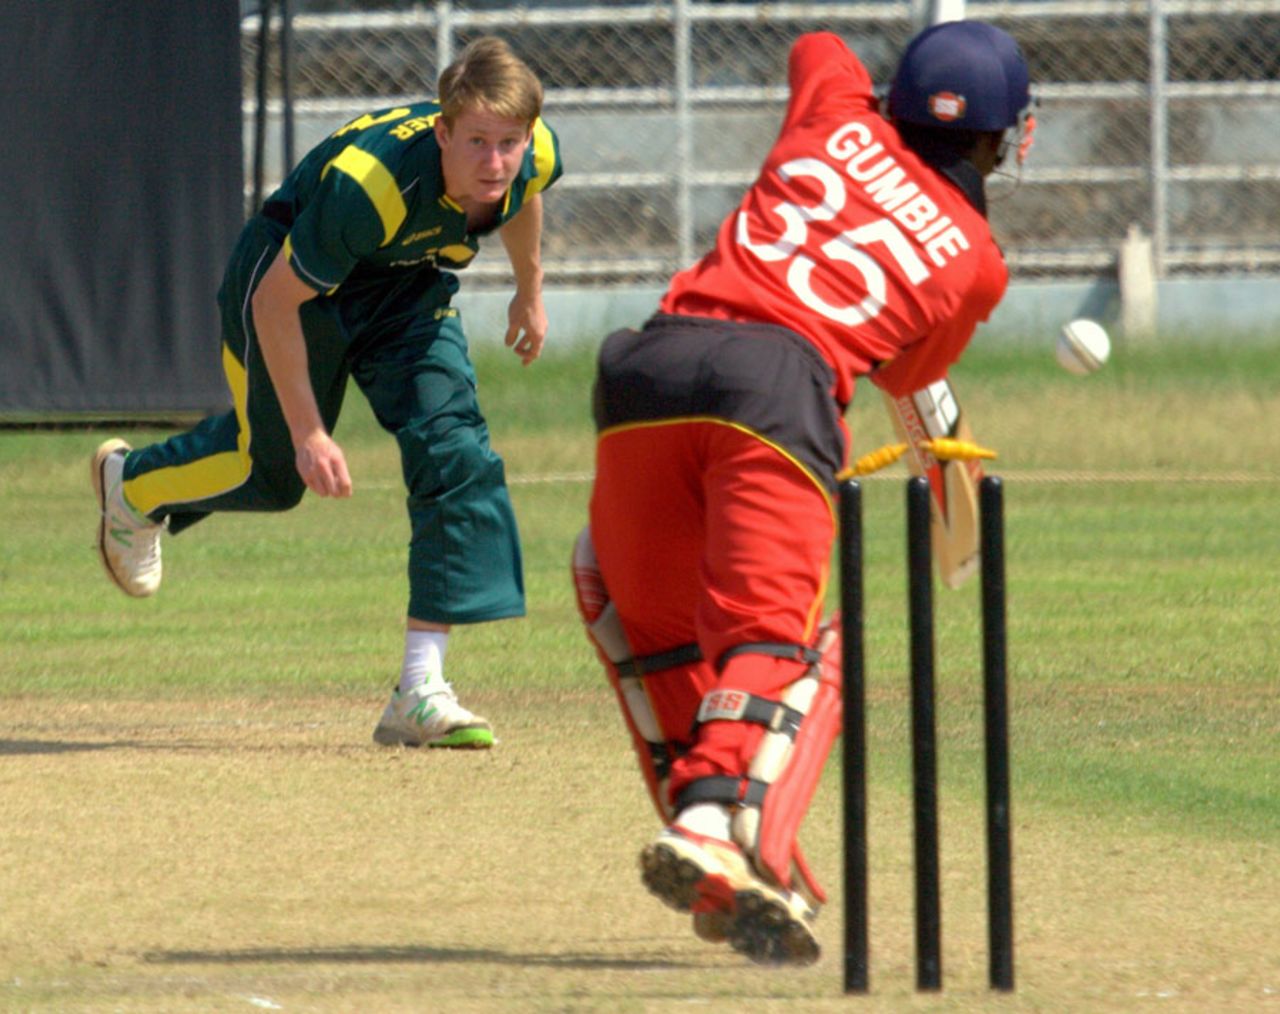 Joylord Gumbie is bowled by Guy Walker, Australia Under-19s v Zimbabwe Under-19s, 3rd place play-off, Visakhapatnam, October 5, 2013 